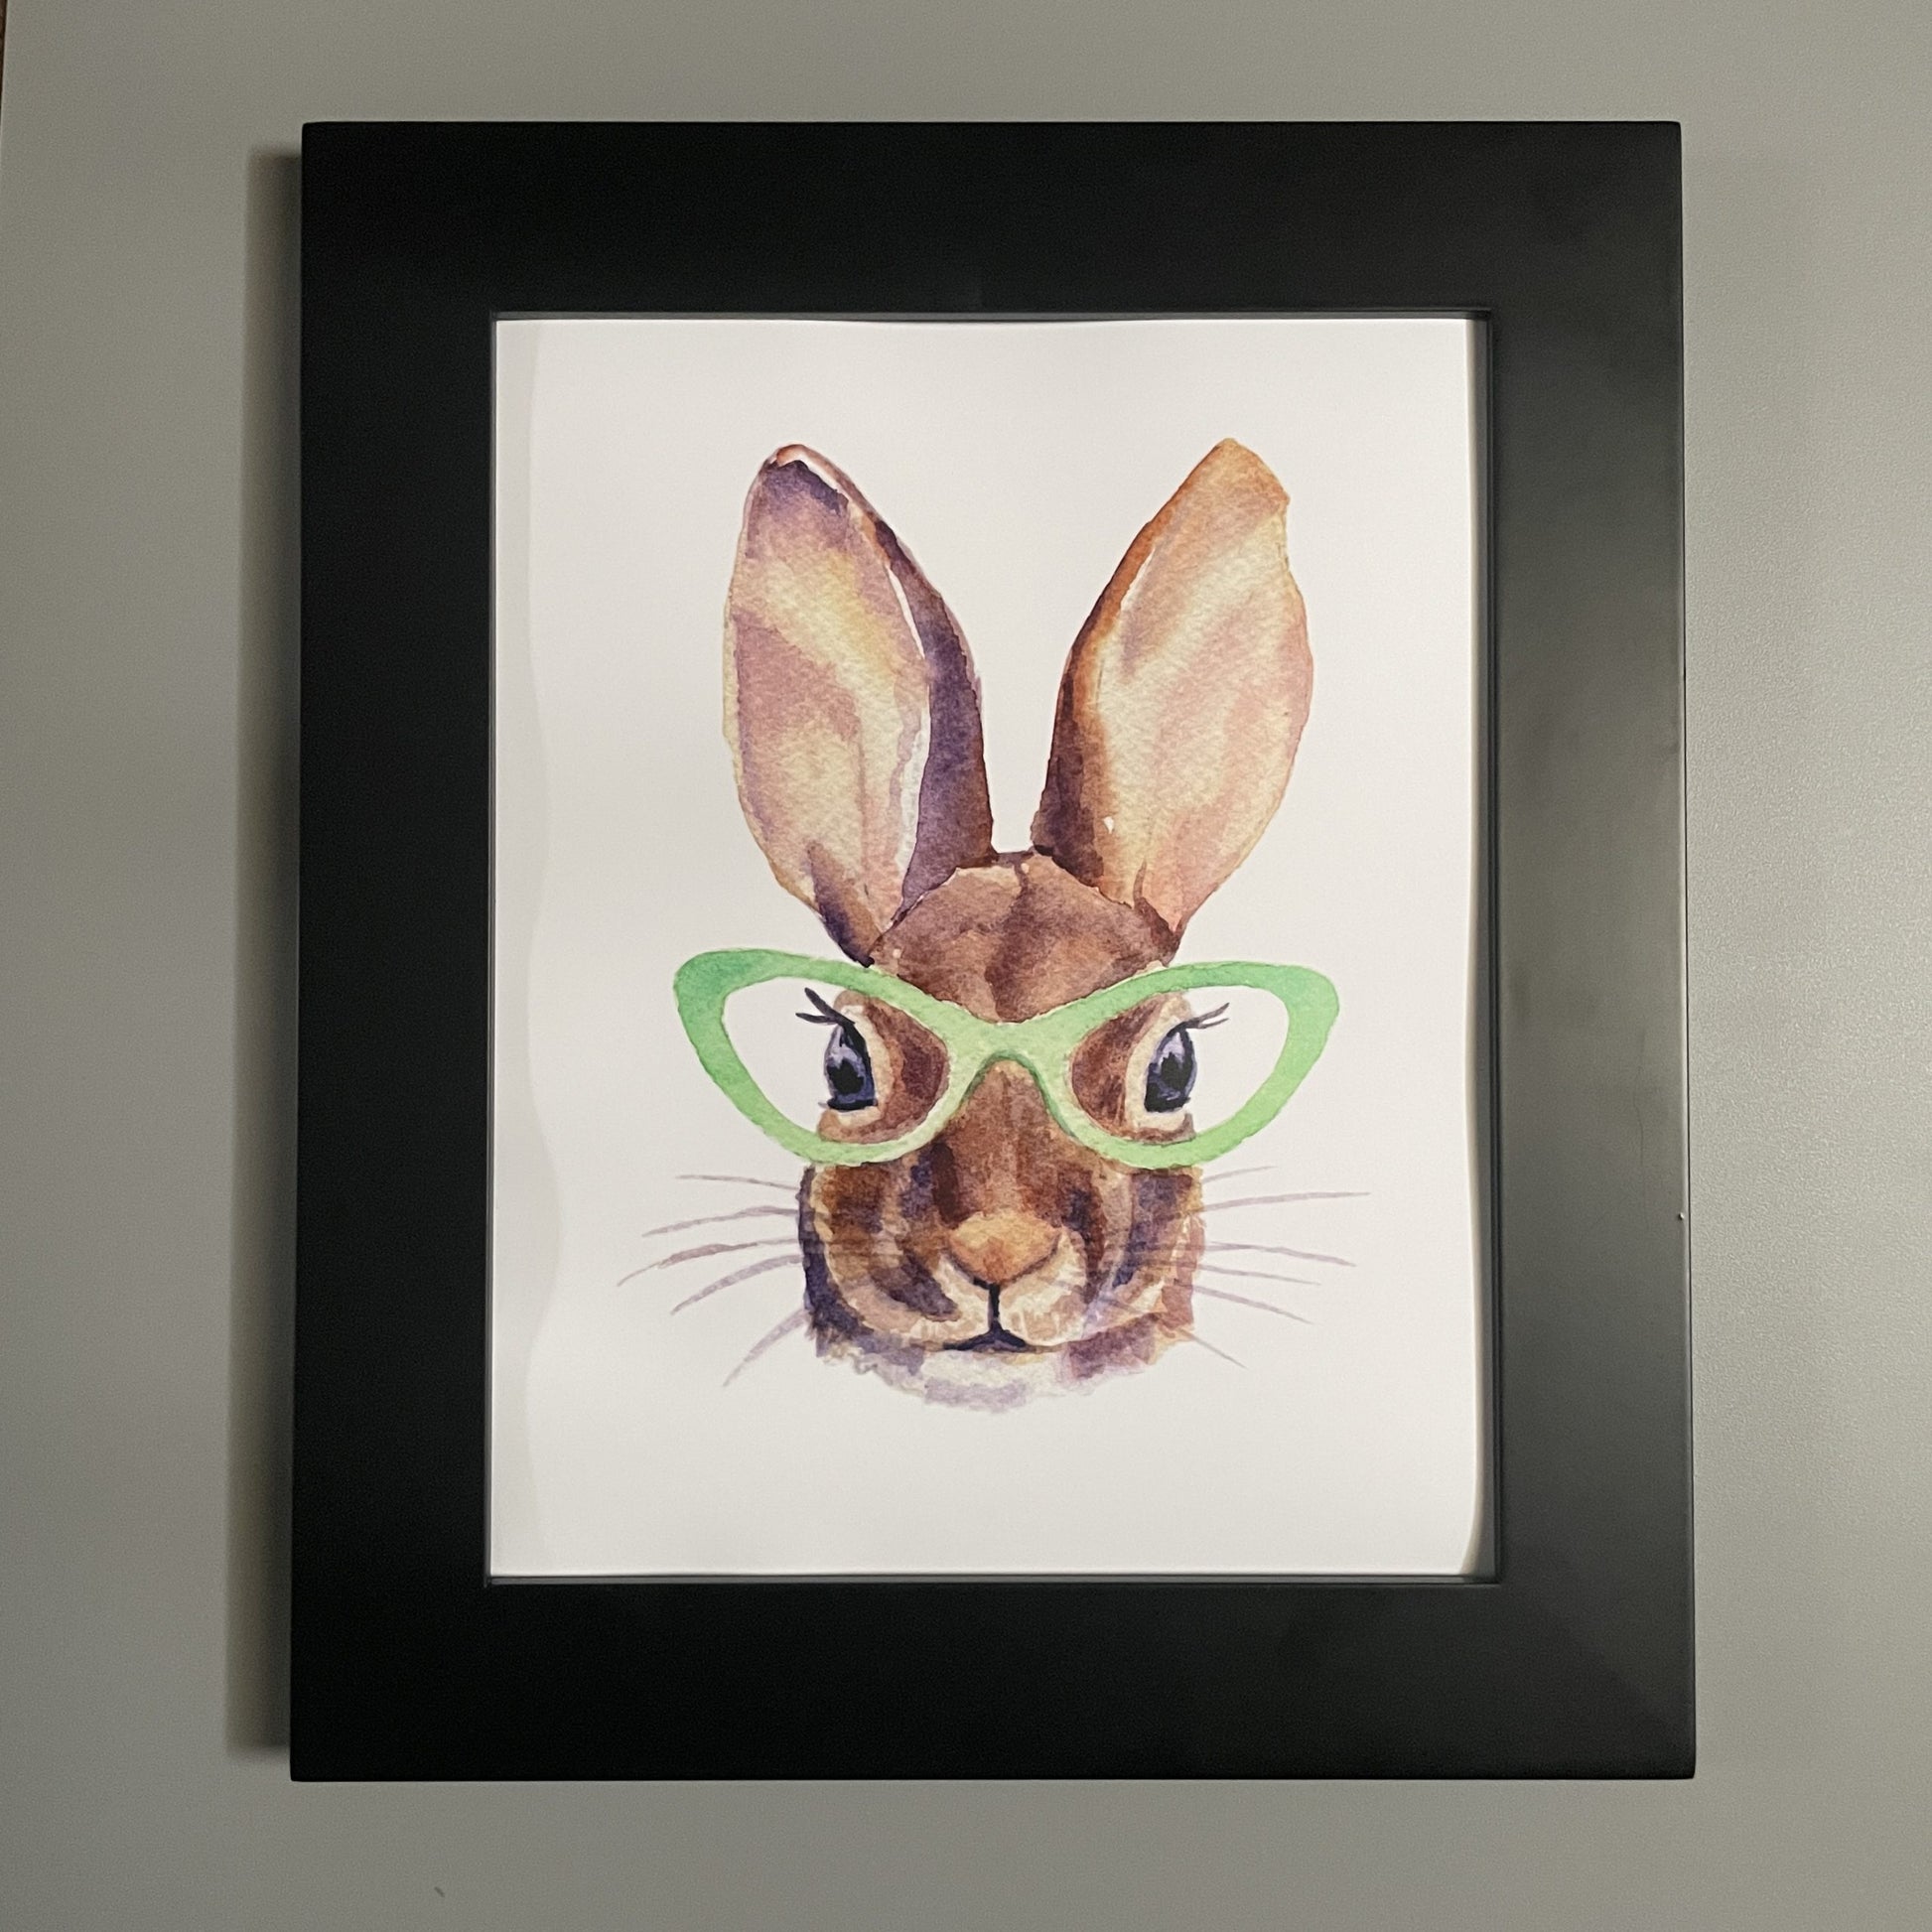 Print of a bunny wearing green glasses shown in a black frame.